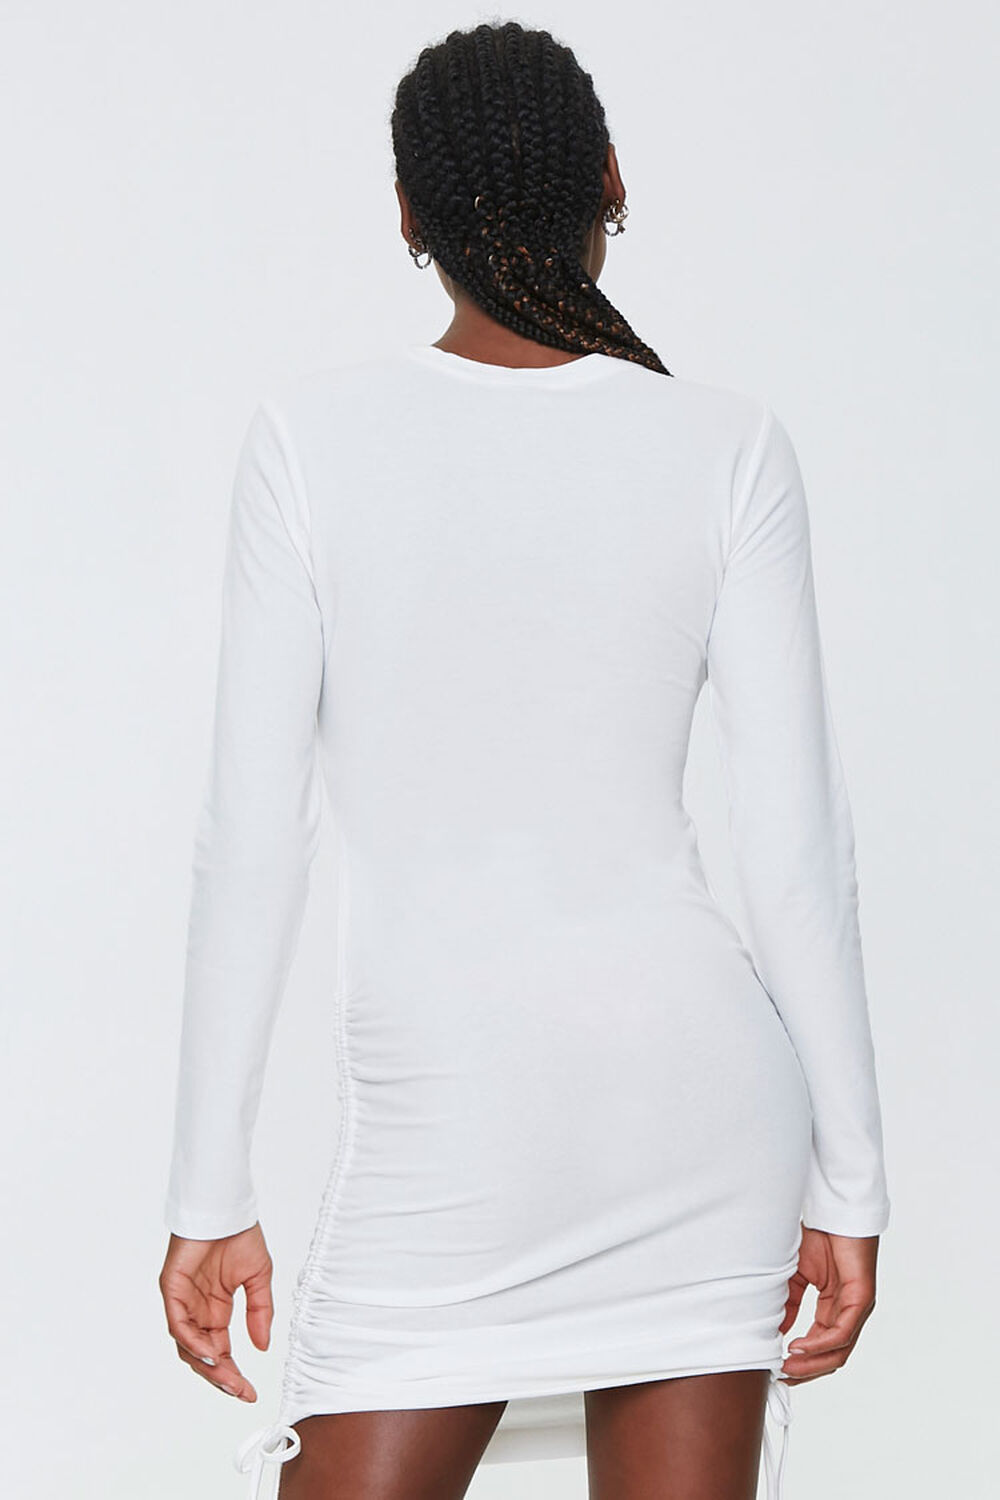 WHITE Bodycon Ruched Drawstring Dress, image 3